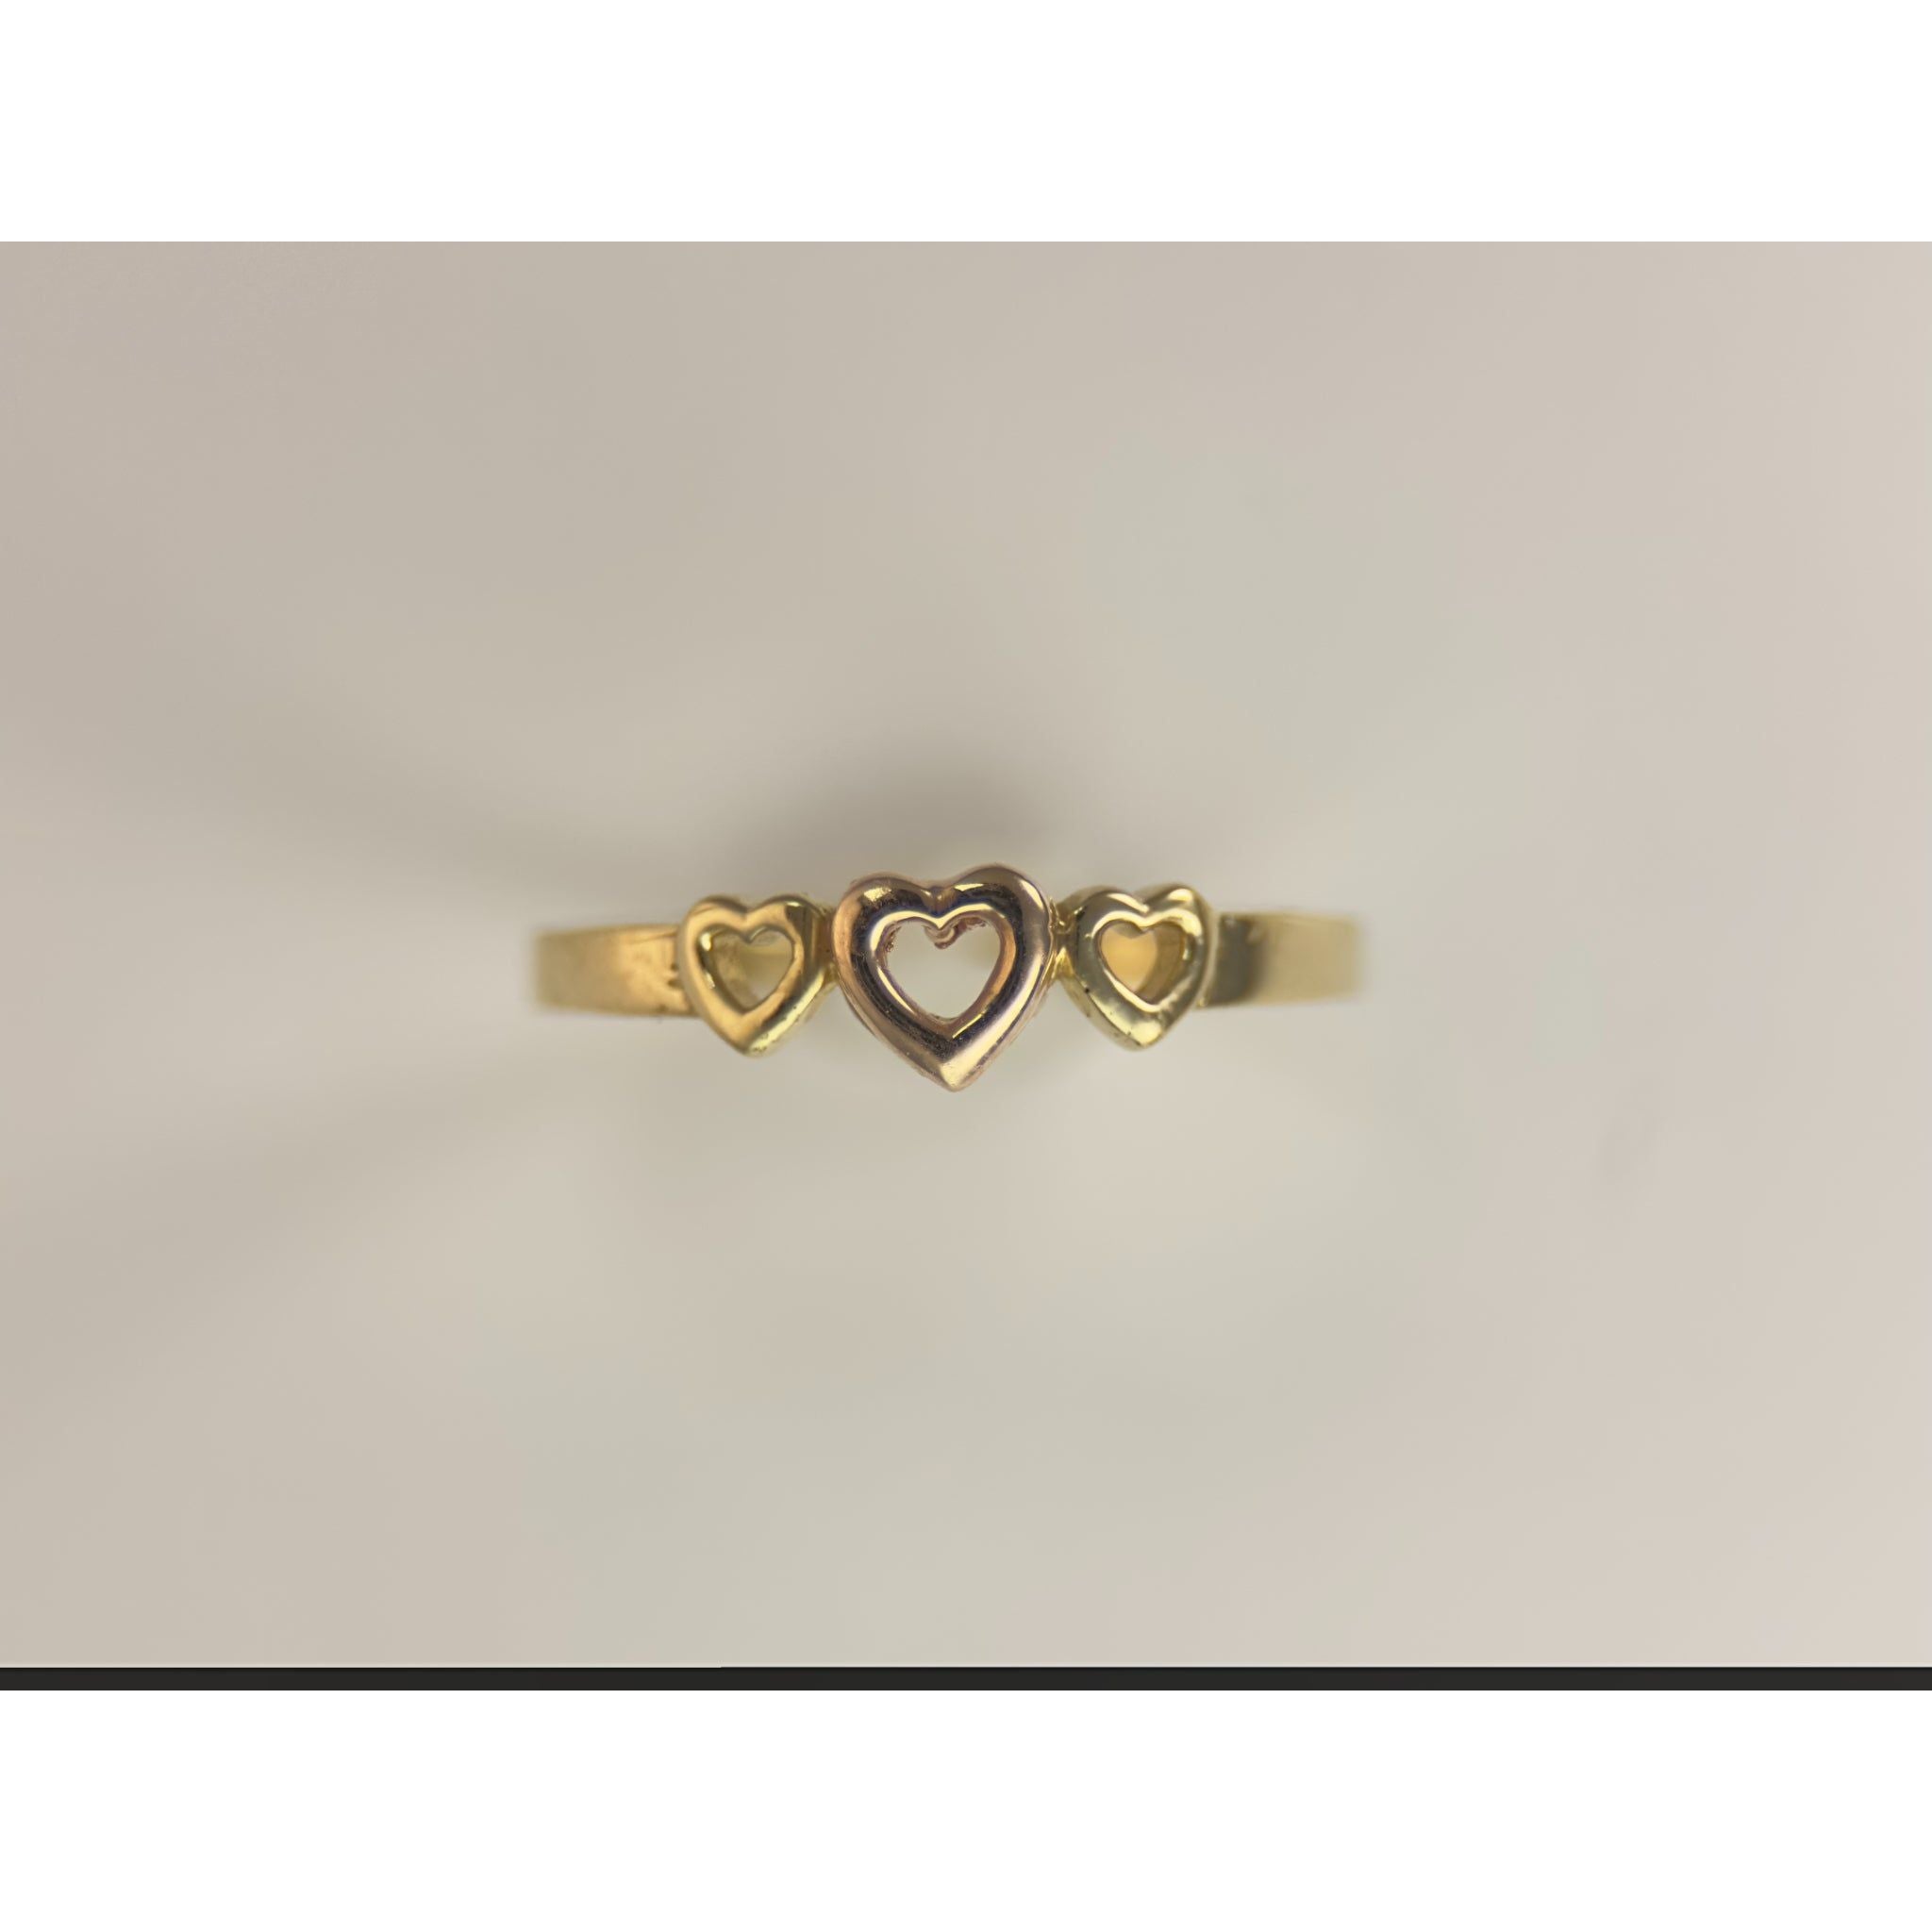 DR2015 - 14K Yellow Gold - Ladies Gold Rings - 3 hearts